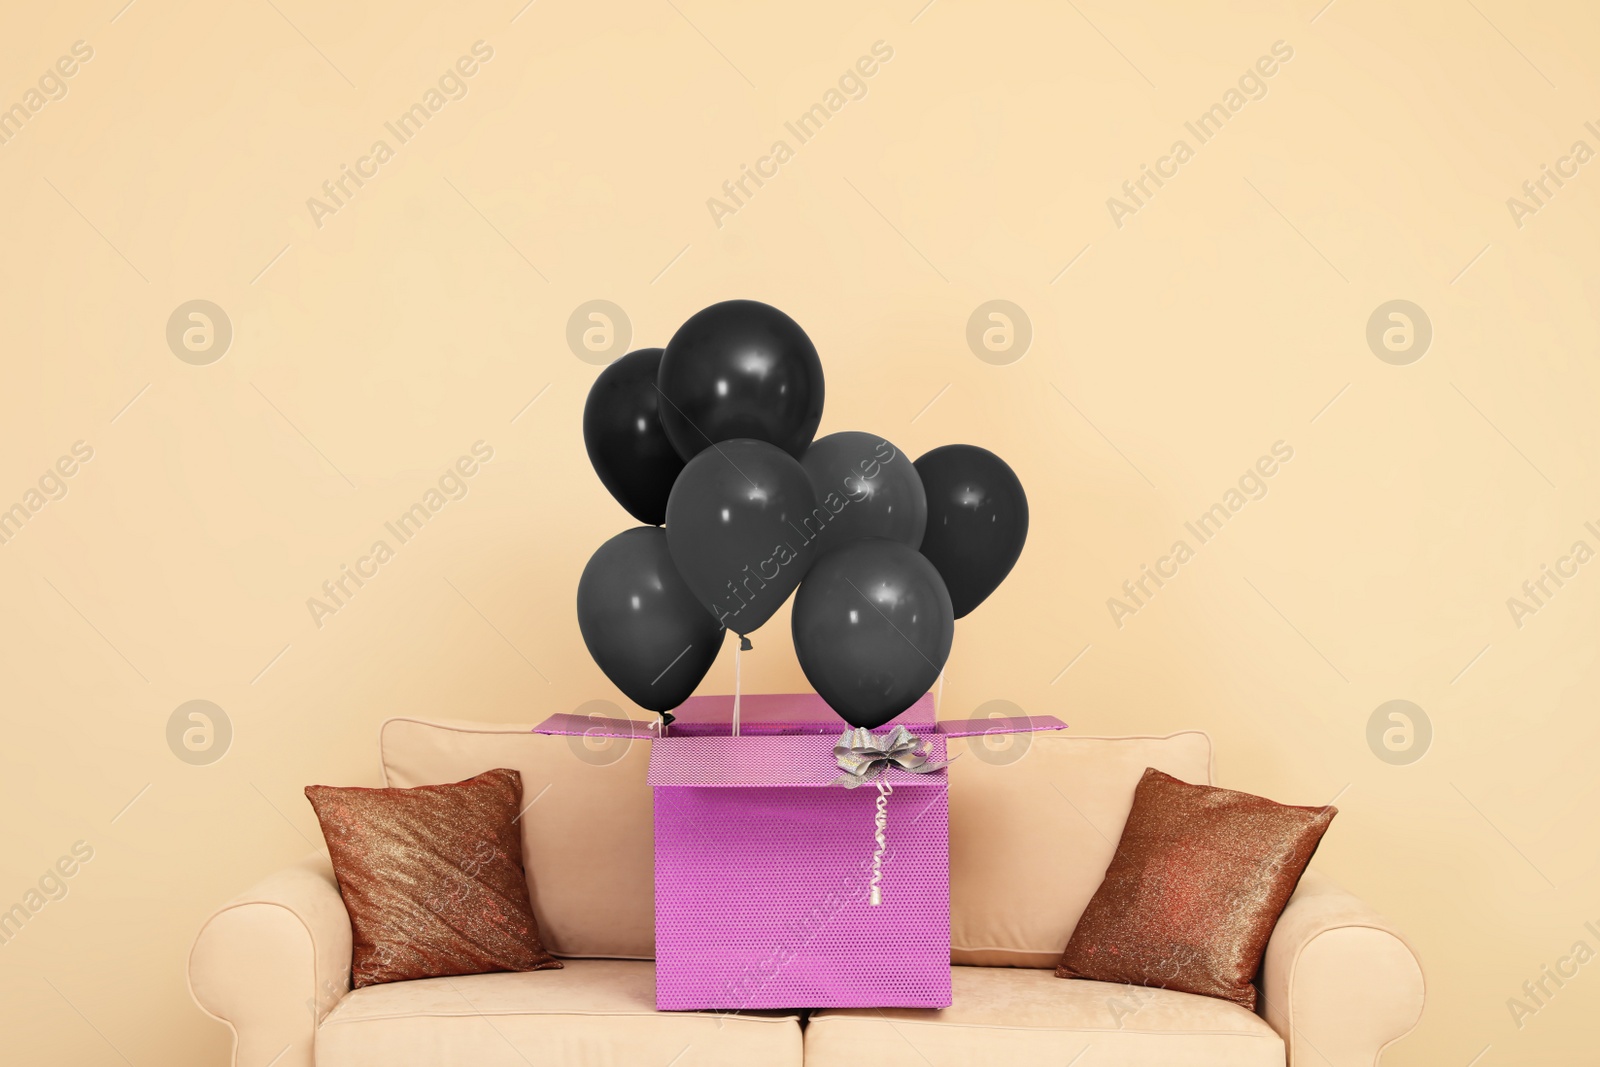 Image of Black Friday concept. Box with bunch of balloons on sofa near beige wall